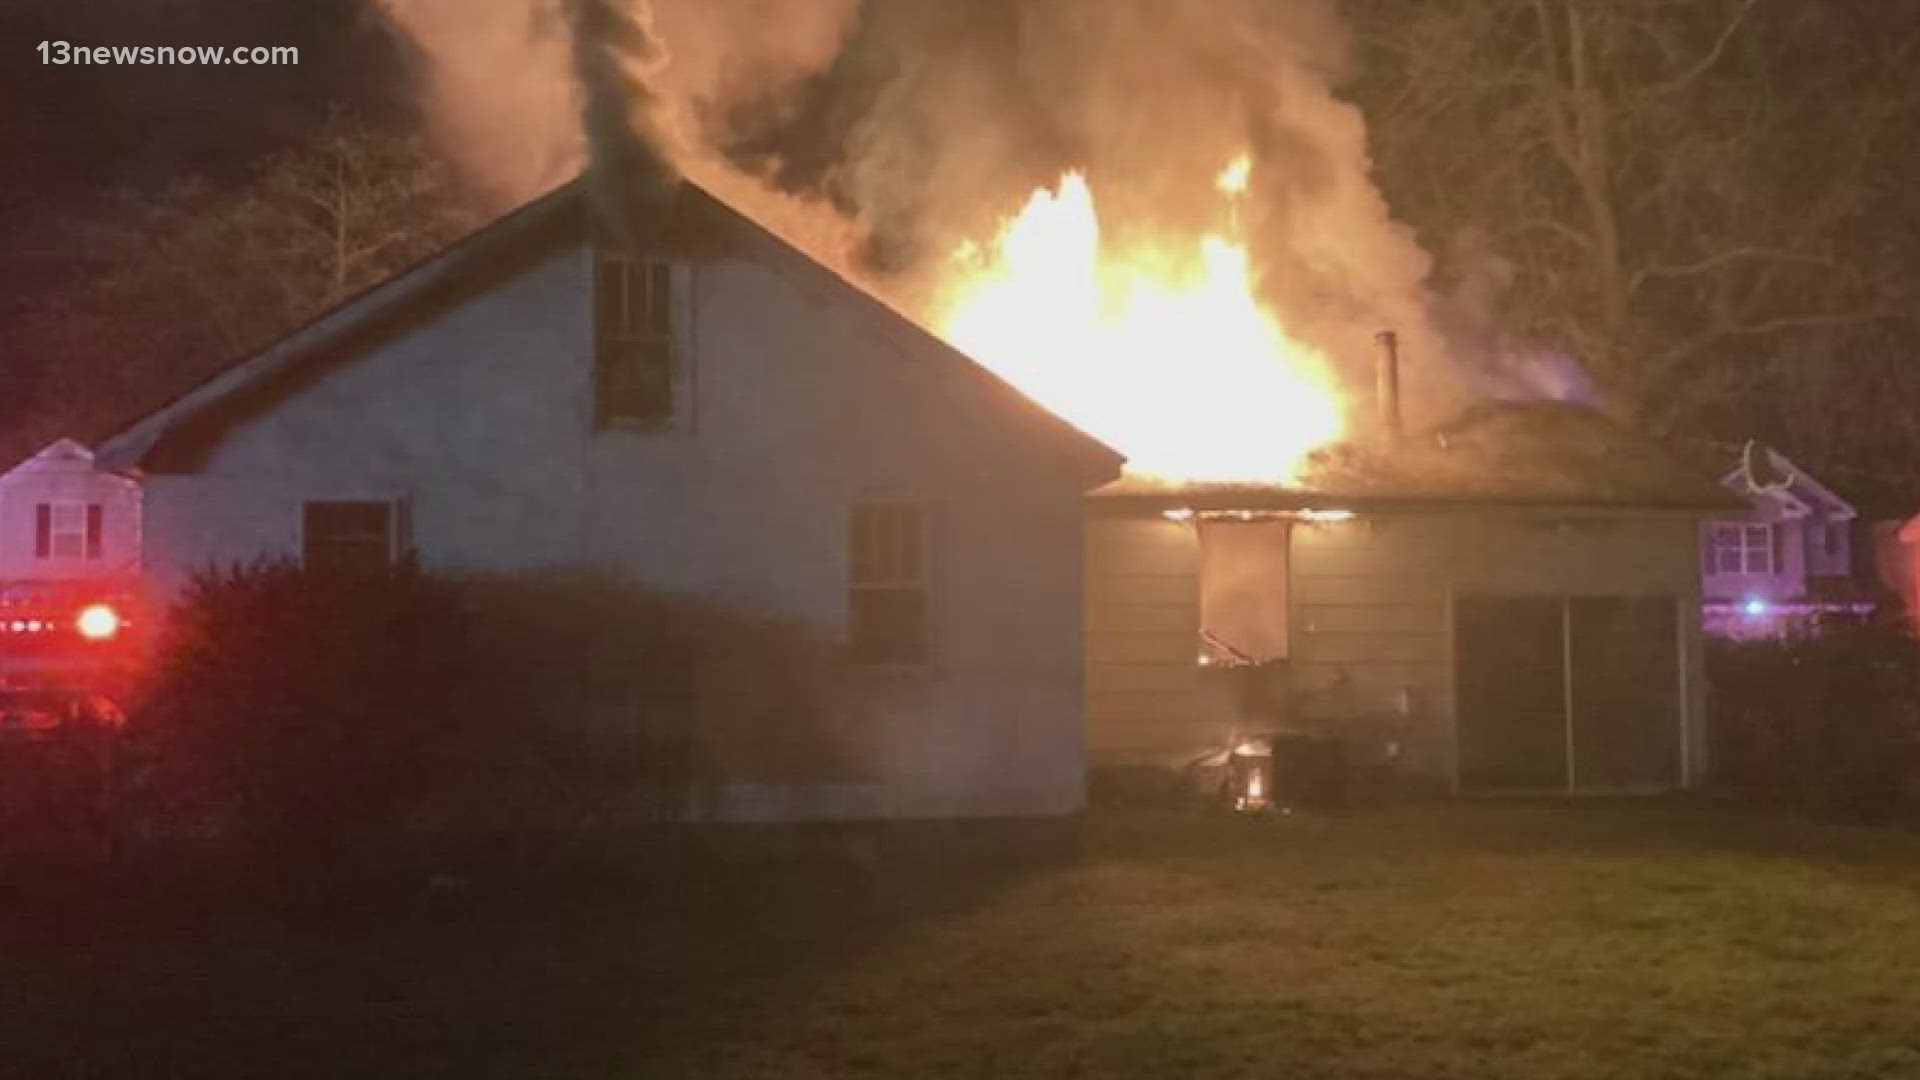 The fire was reported just before 3:30 a.m. in the Indian River section of Chesapeake.